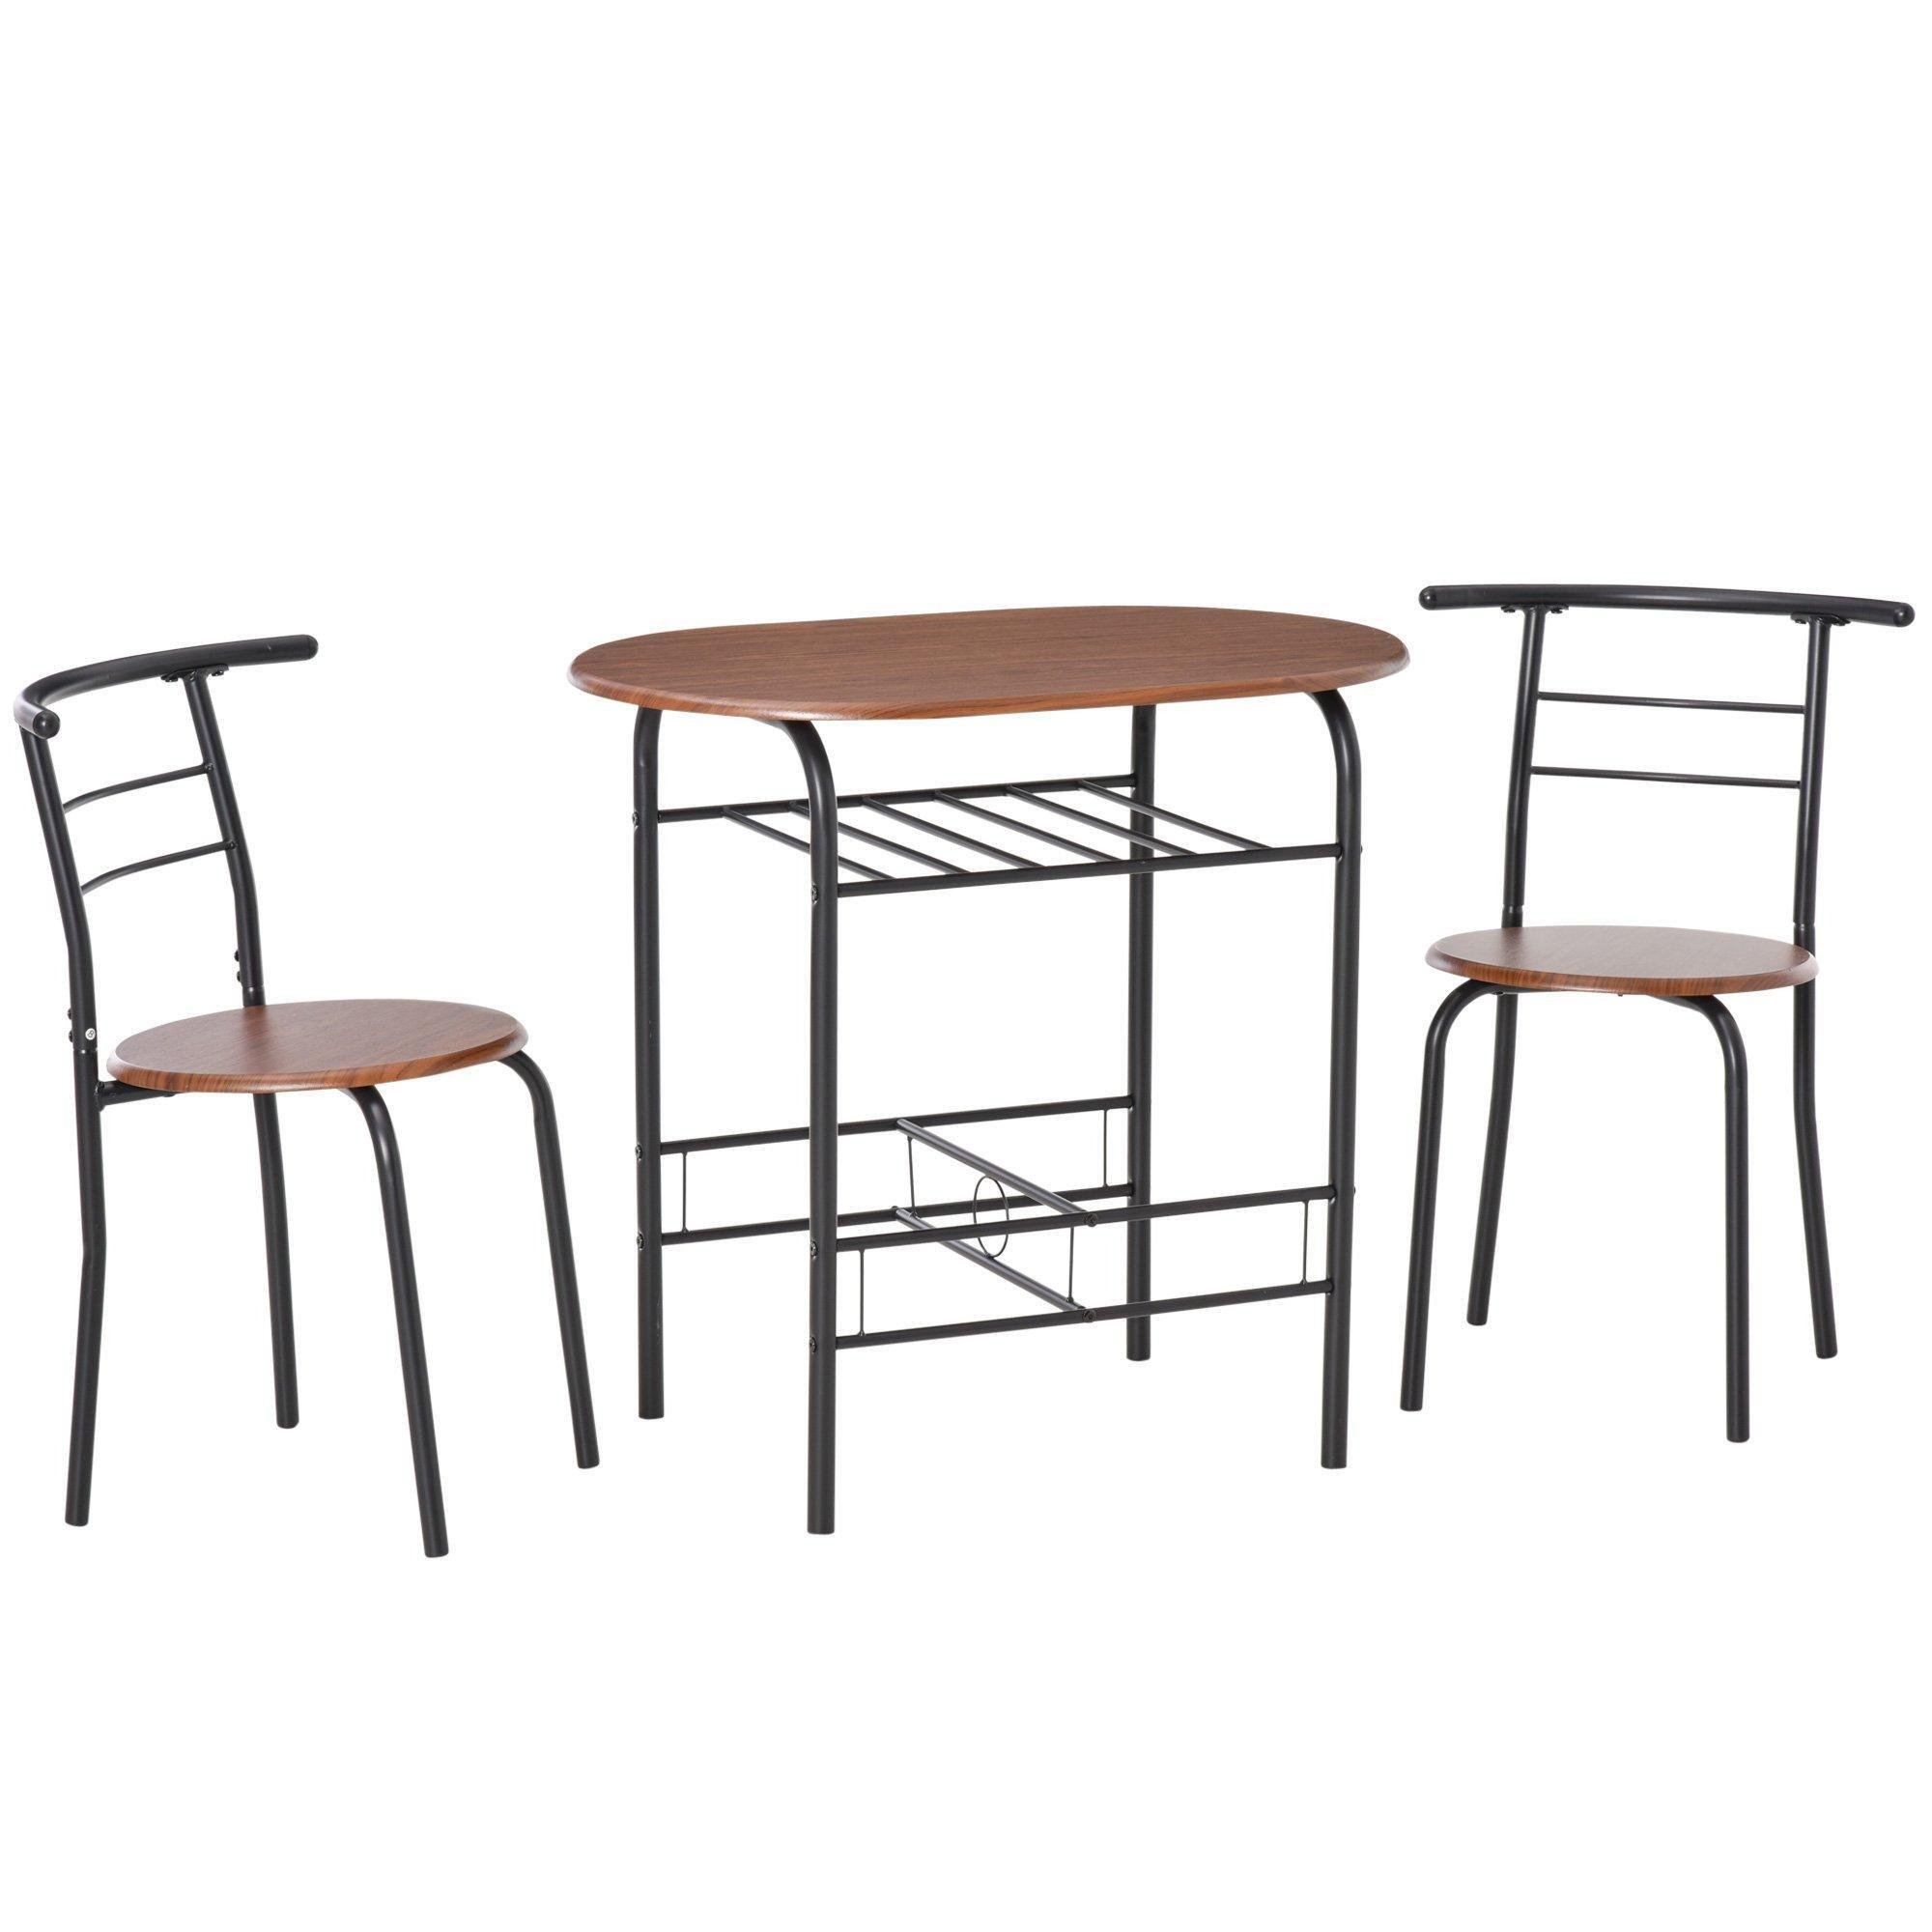 3 Piece Bar Table Set 2 Stools Industrial Style Dining Room Storage - image 1